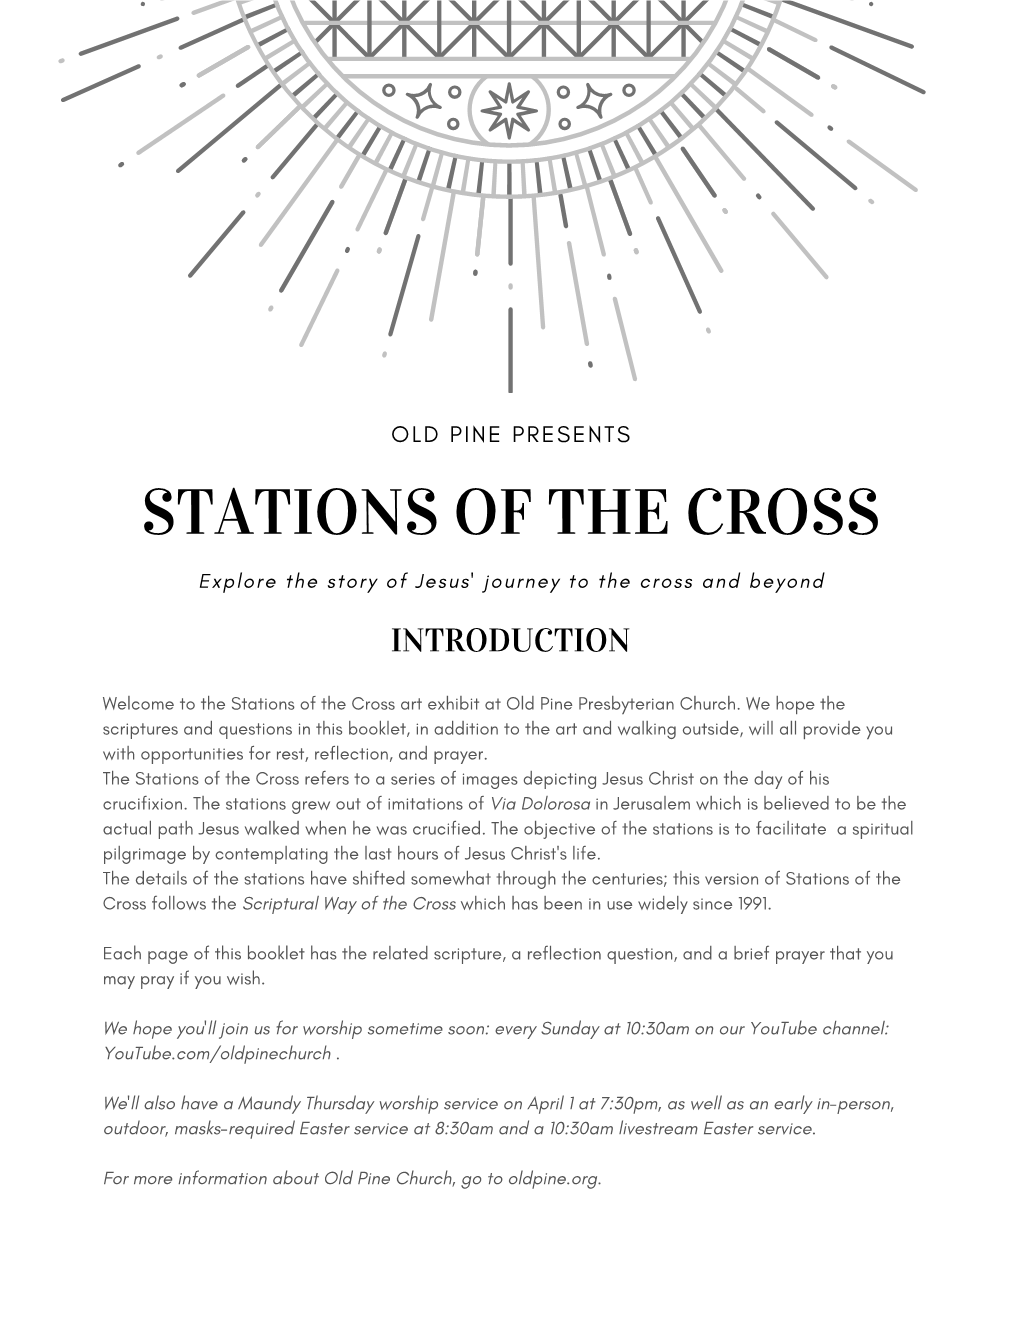 STATIONS of the CROSS Explore the Story of Jesus' Journey to the Cross and Beyond